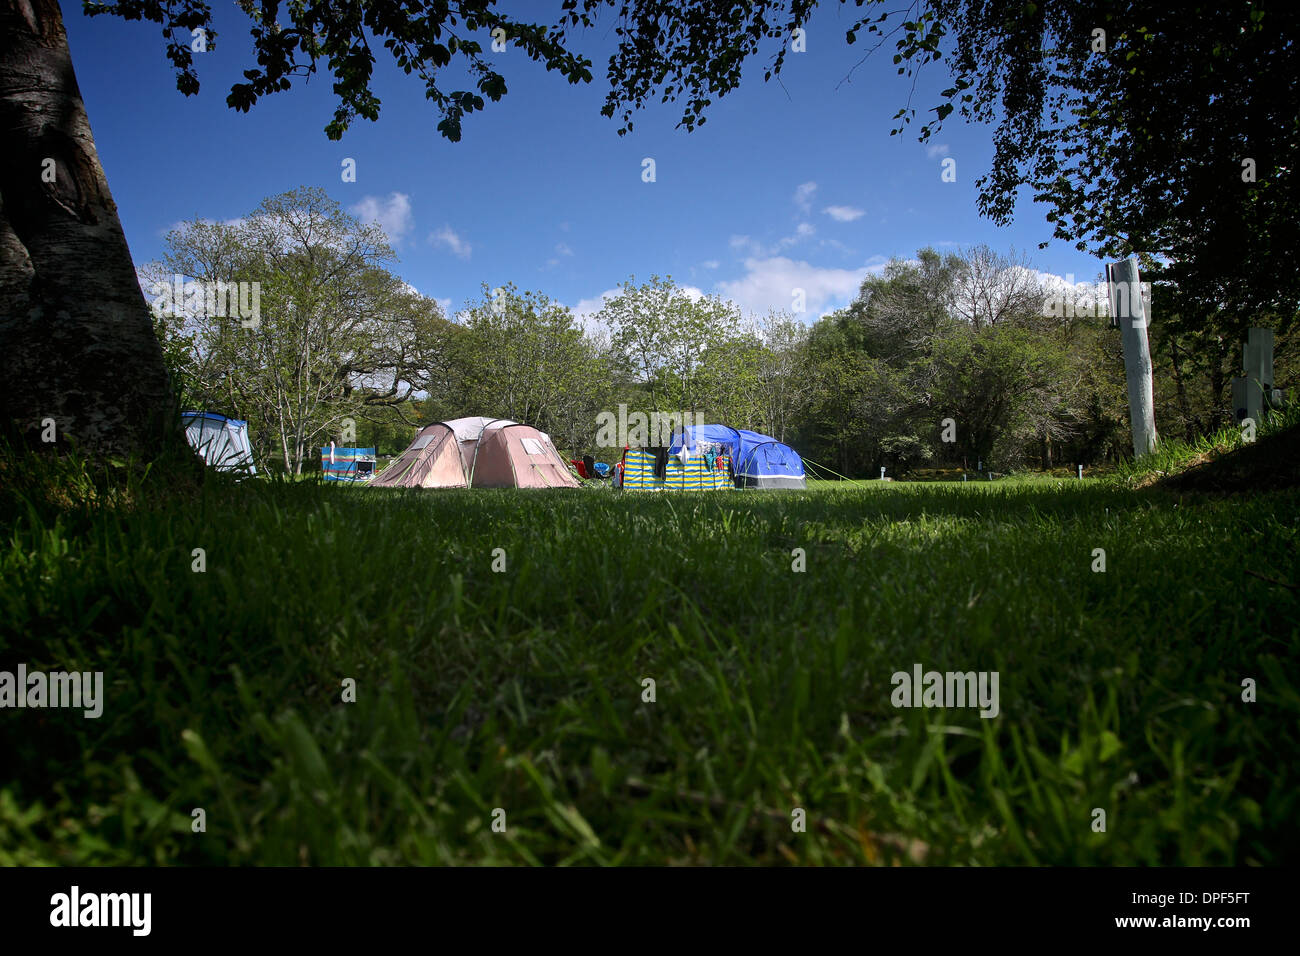 Tent at campsite on a hot and sunny summers day, camping holiday Stock Photo